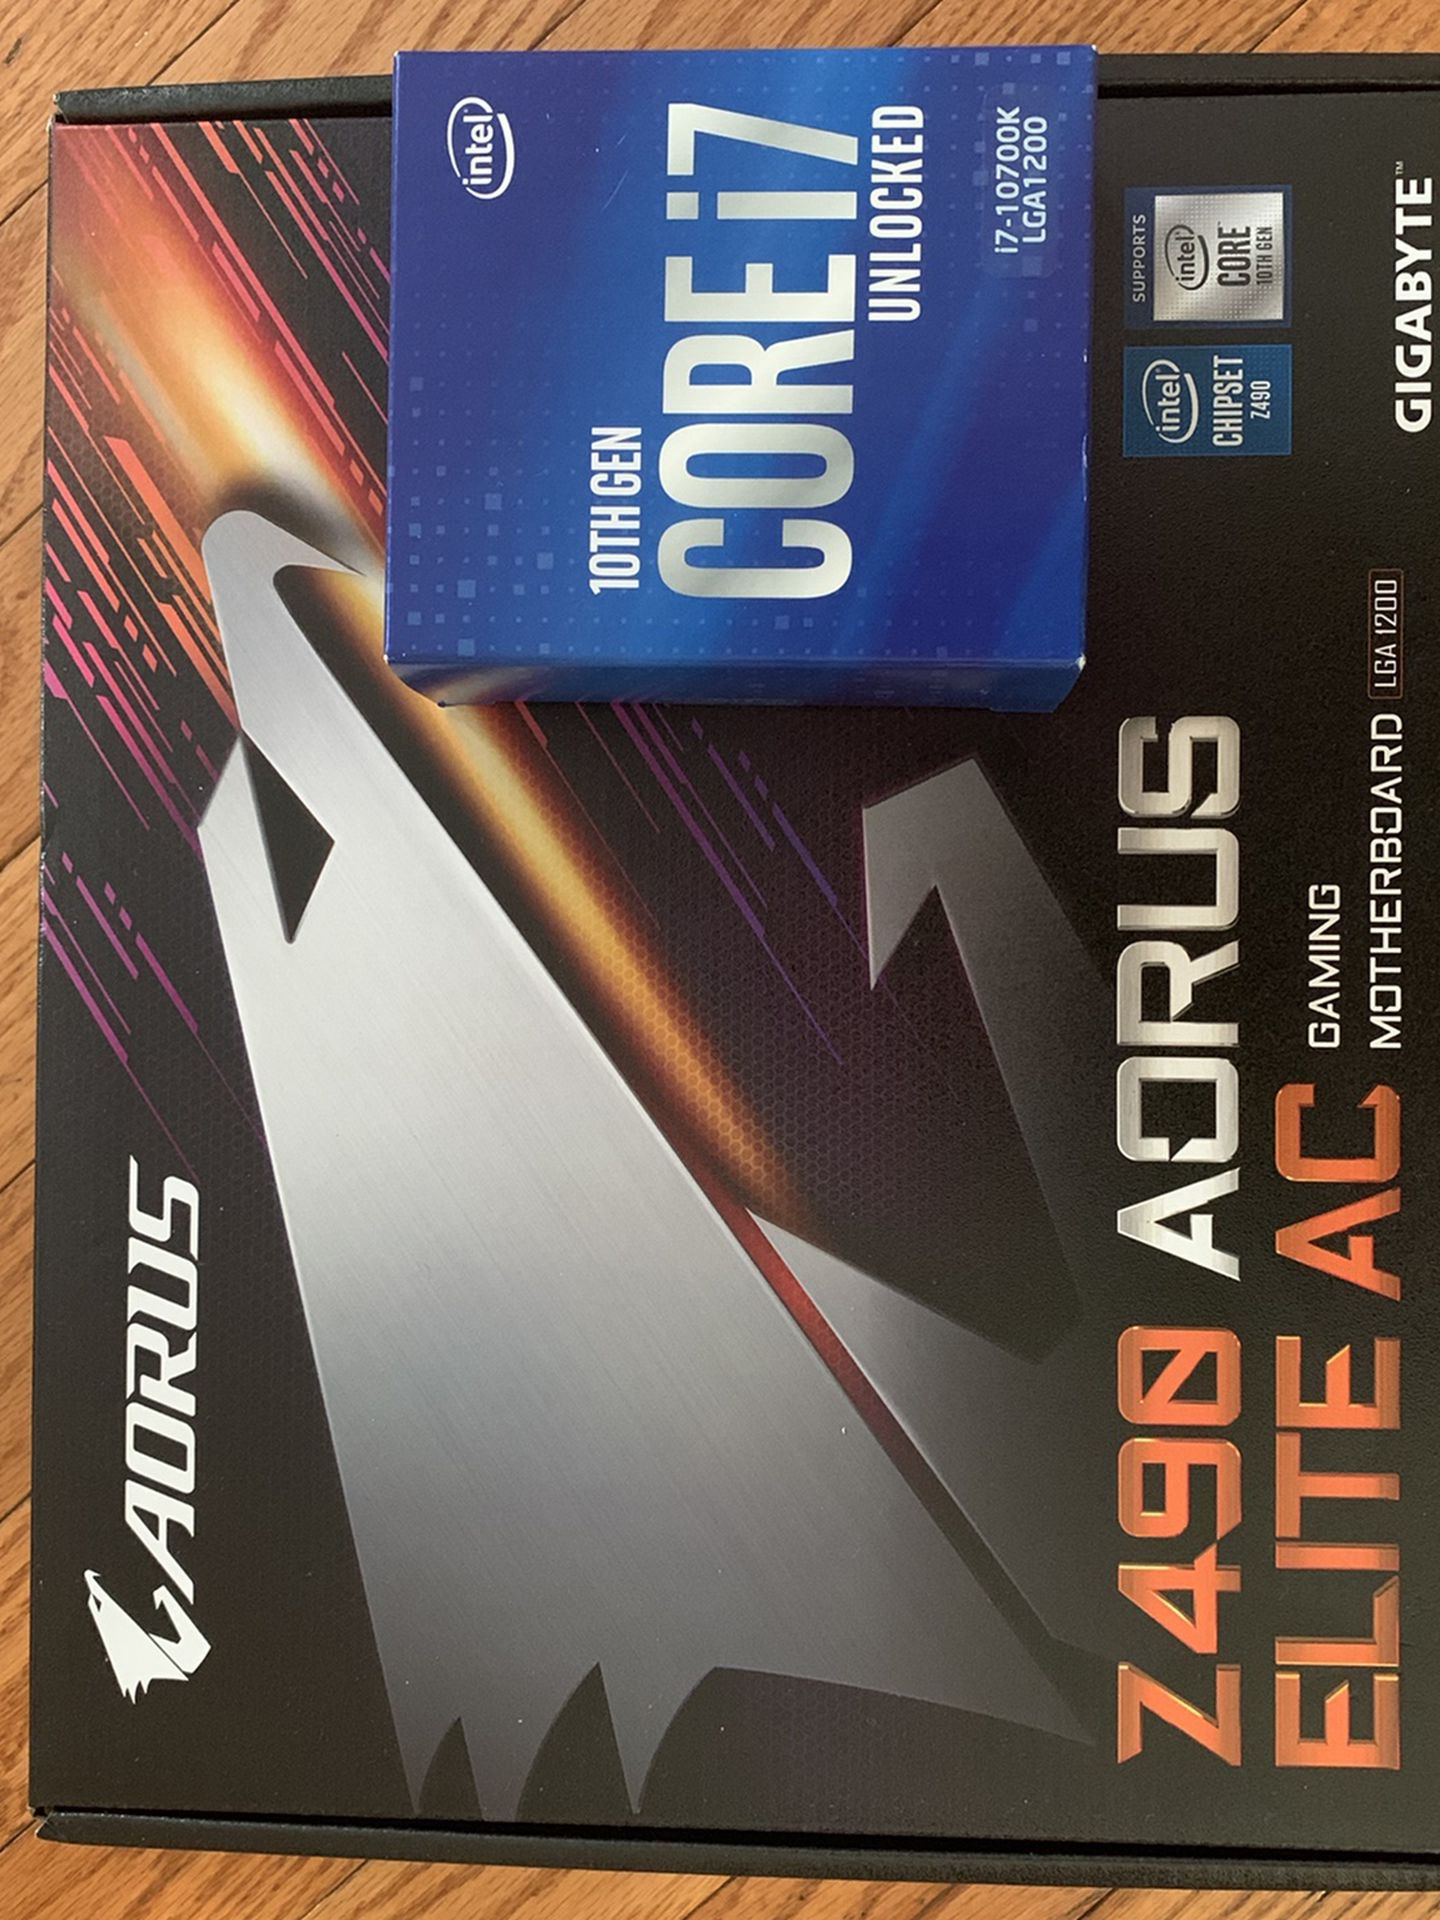 Intel I7 10700K Cpu And Z490 Motherboard New In Box